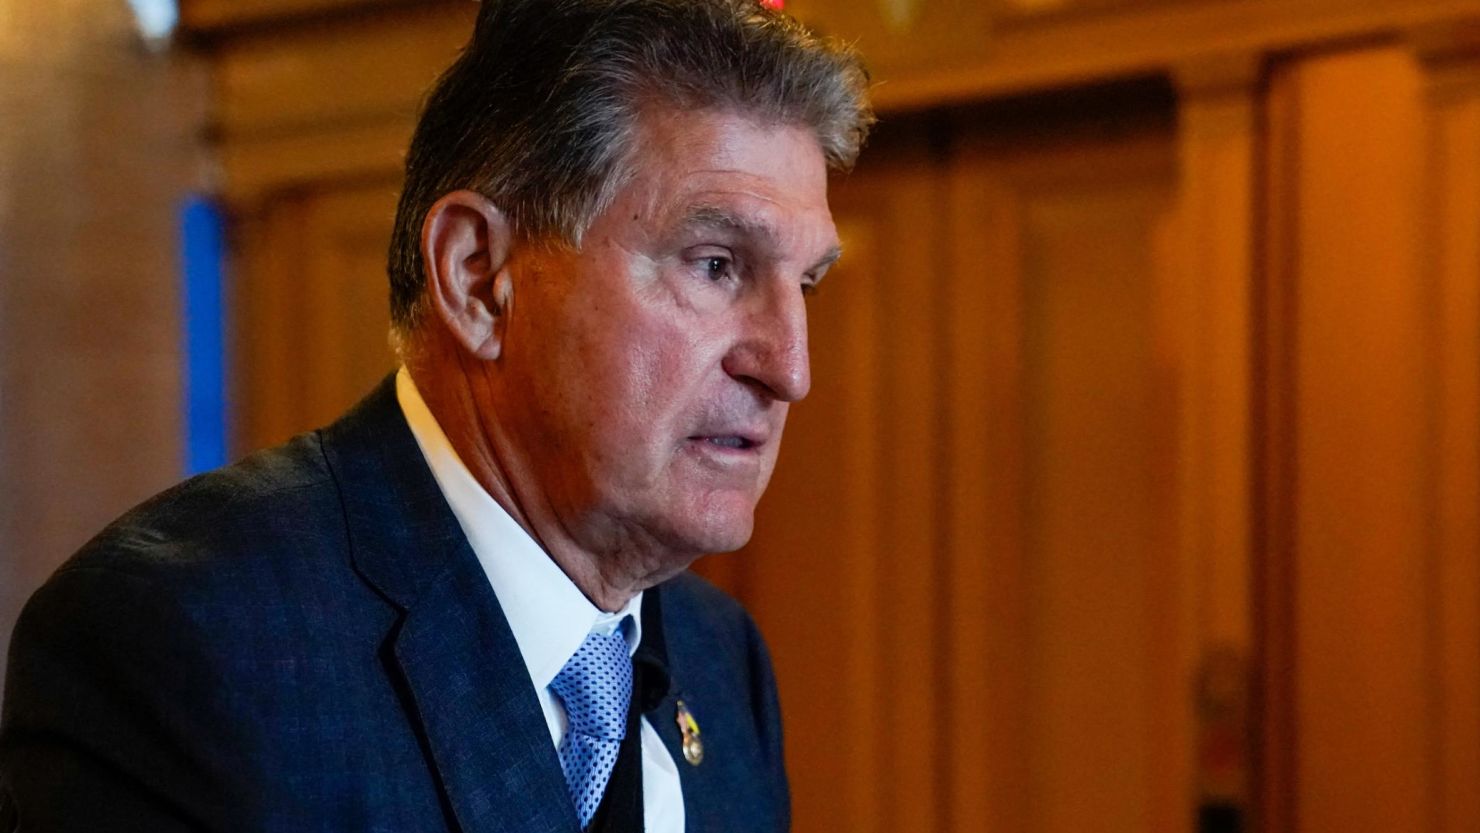 Sen. Joe Manchin of West Virginia wants to include a plan in the government funding bill that would expedite the permitting and environmental review process for energy projects.